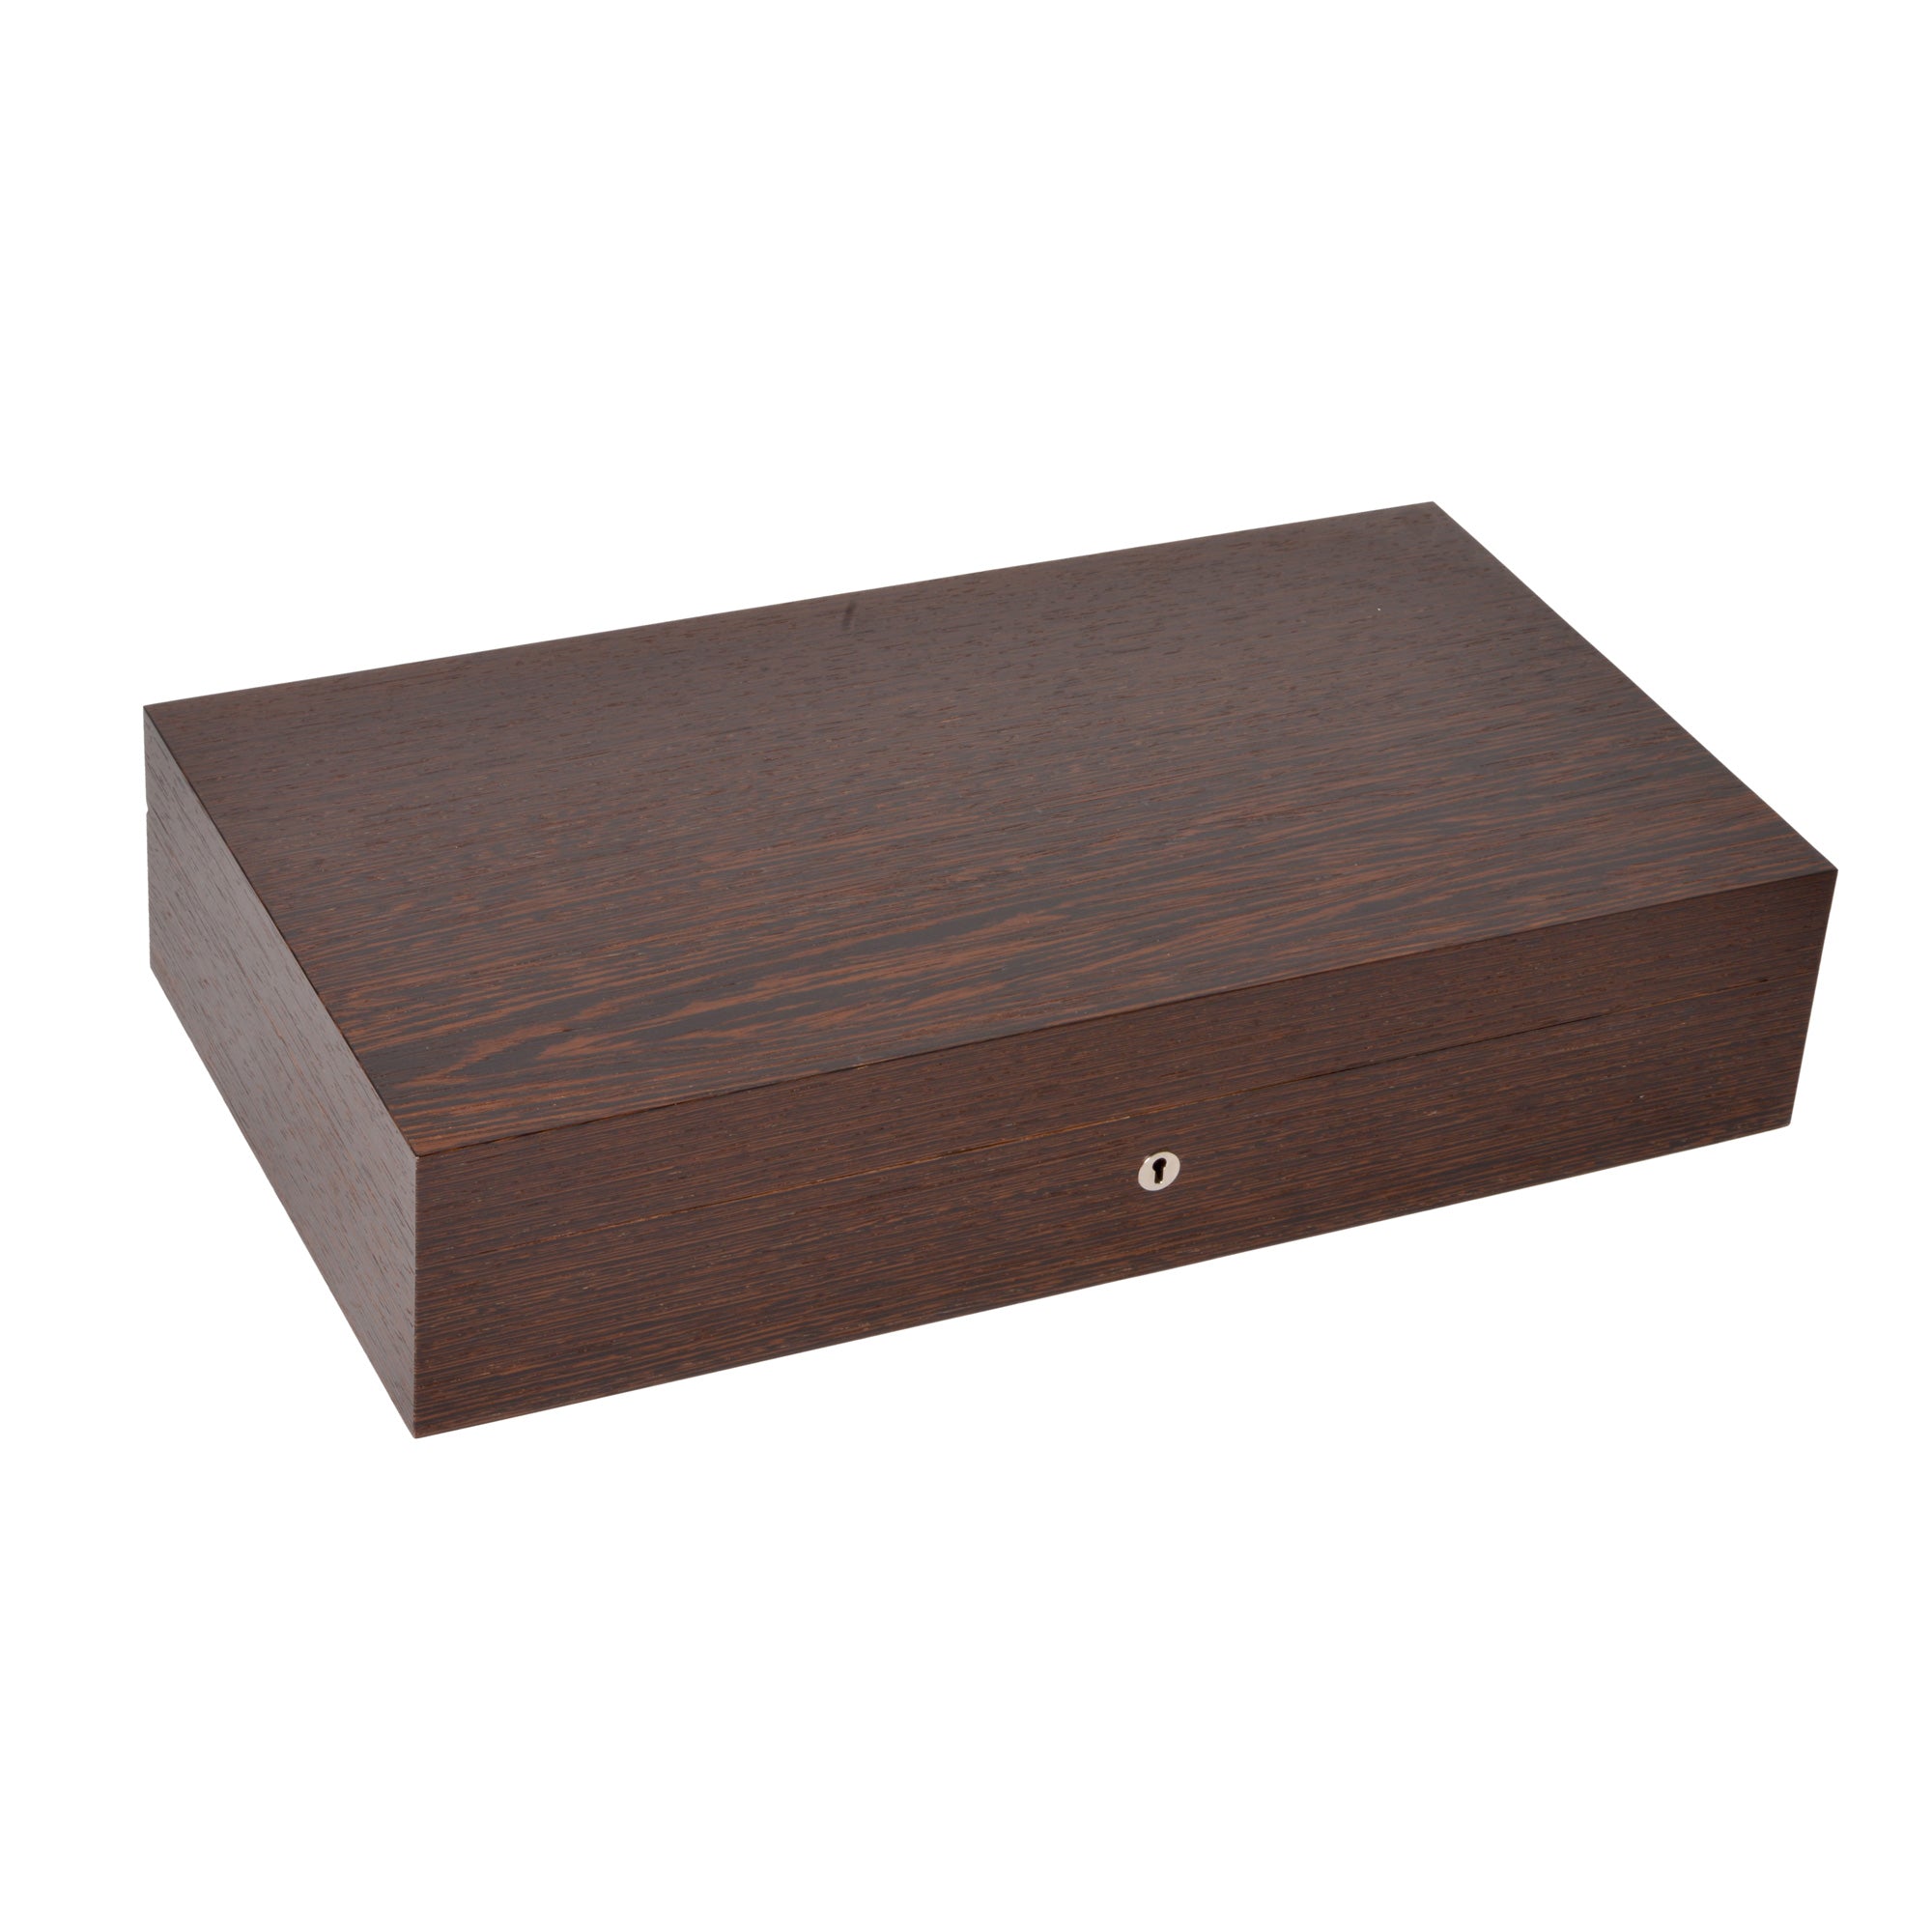 "Classic" - Wenge - Box of 15 watches